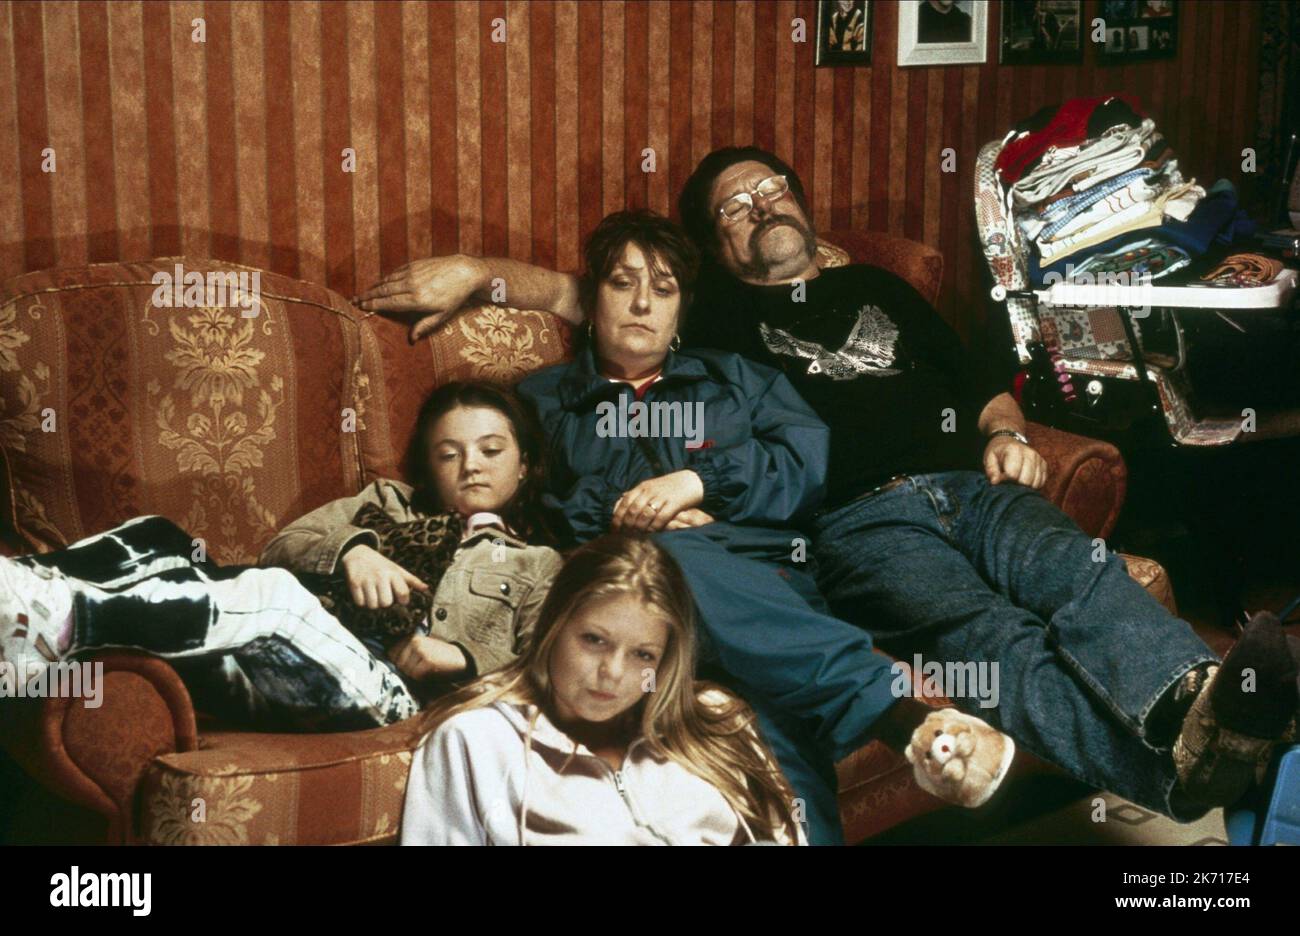 FINN ATKINS, KELLY TRESHER, KATHY BURKE, RICKY TOMLINSON, ONCE UPON A TIME IN THE MIDLANDS, 2002 Stock Photo